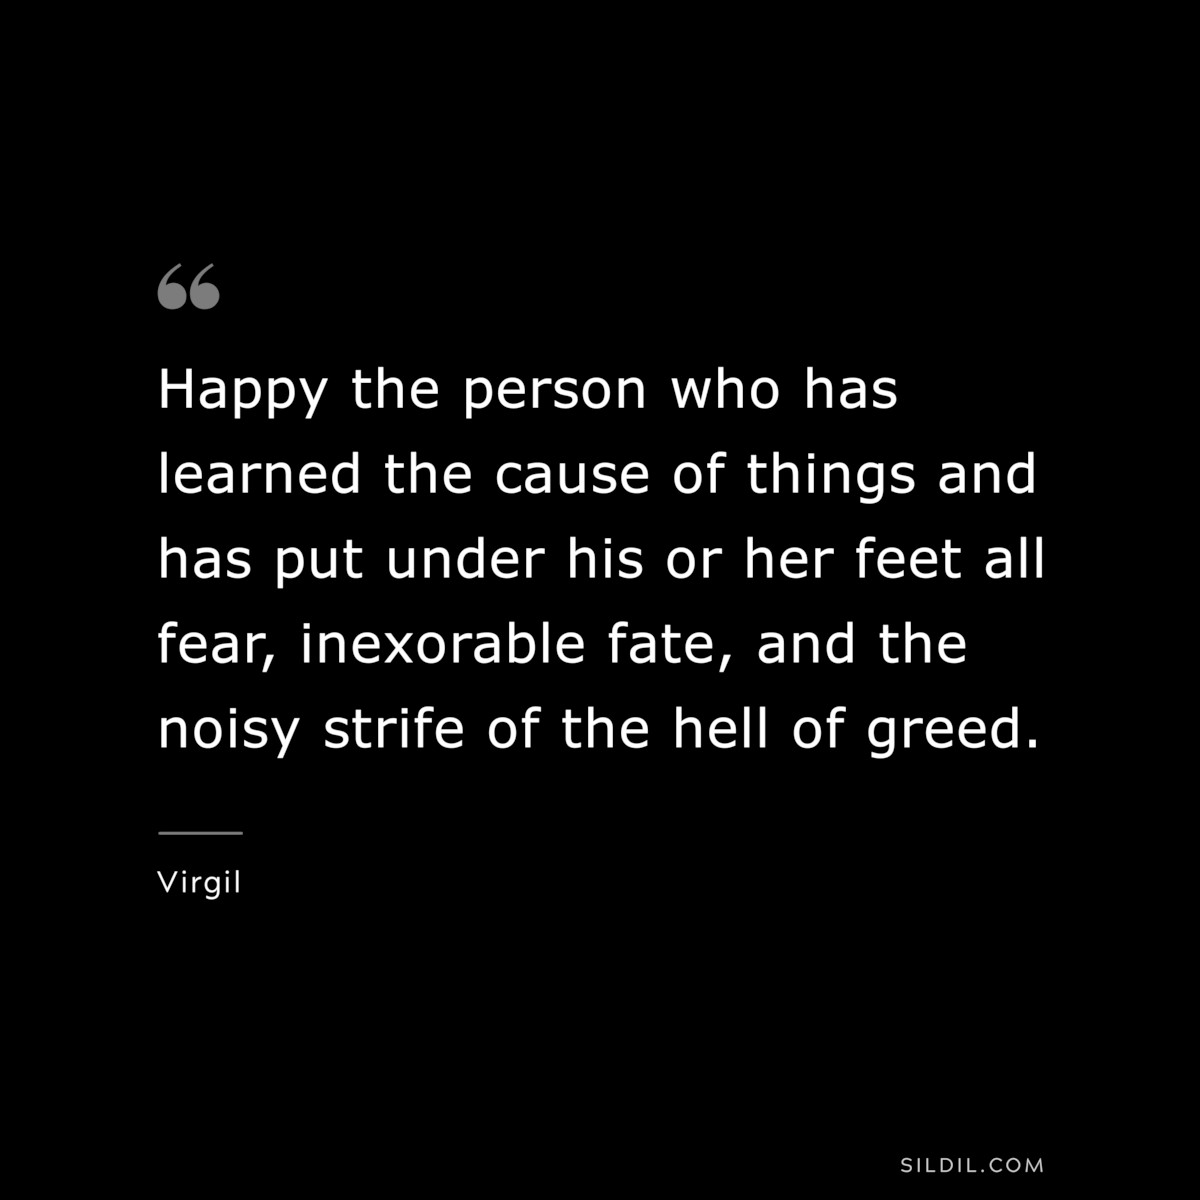 Happy the person who has learned the cause of things and has put under his or her feet all fear, inexorable fate, and the noisy strife of the hell of greed. ― Virgil